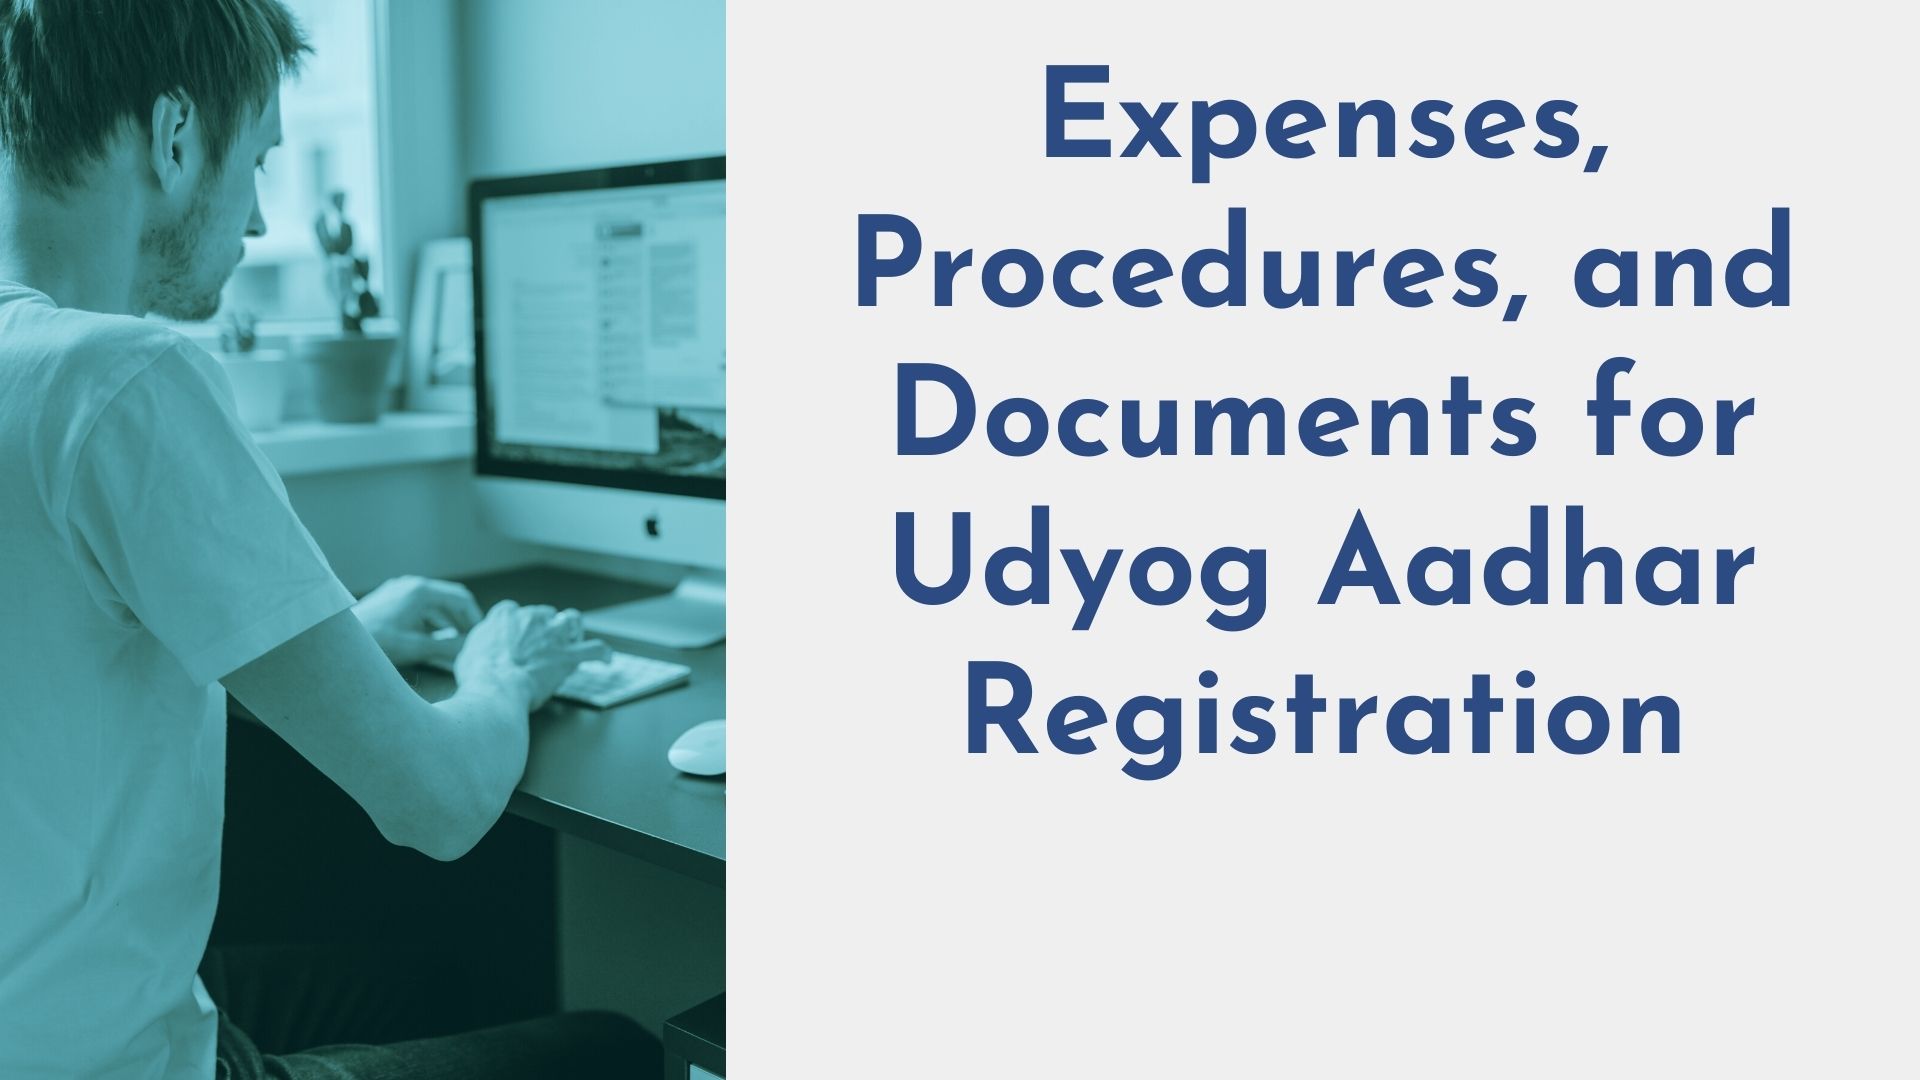 Expenses, Procedures, and Documents for Udyog Aadhar Registration